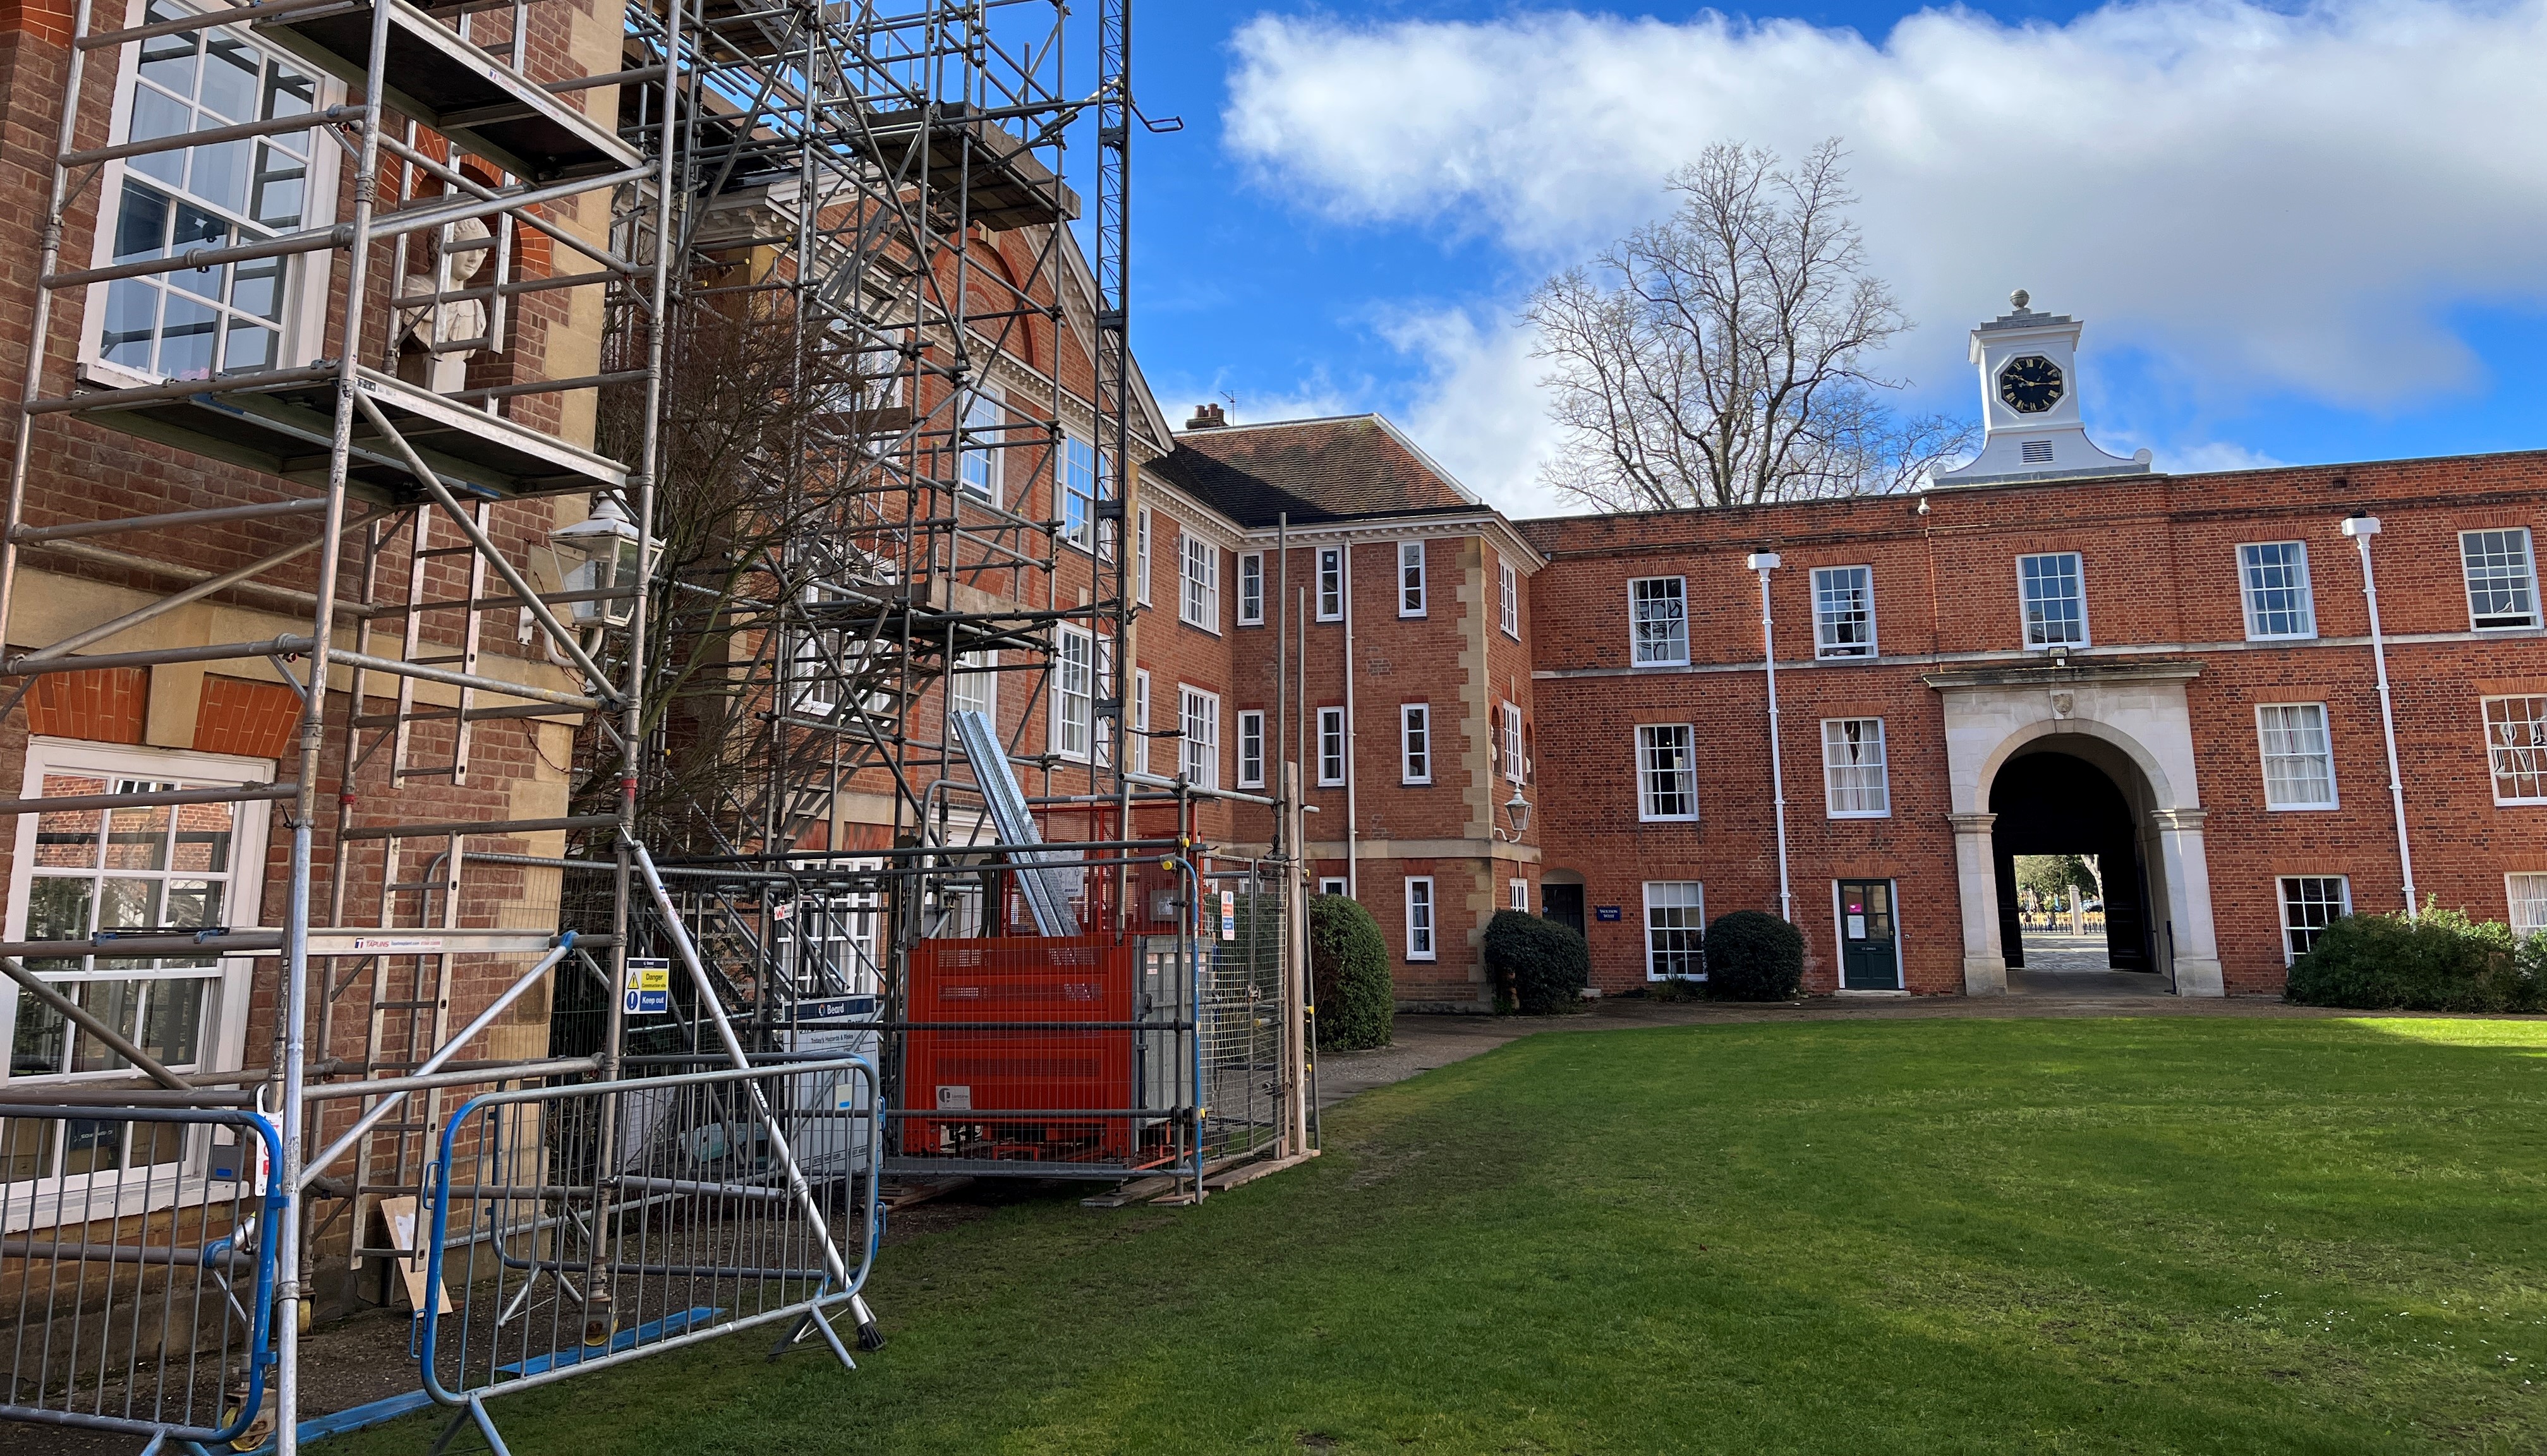 Photo of a red brick building with scaffolding